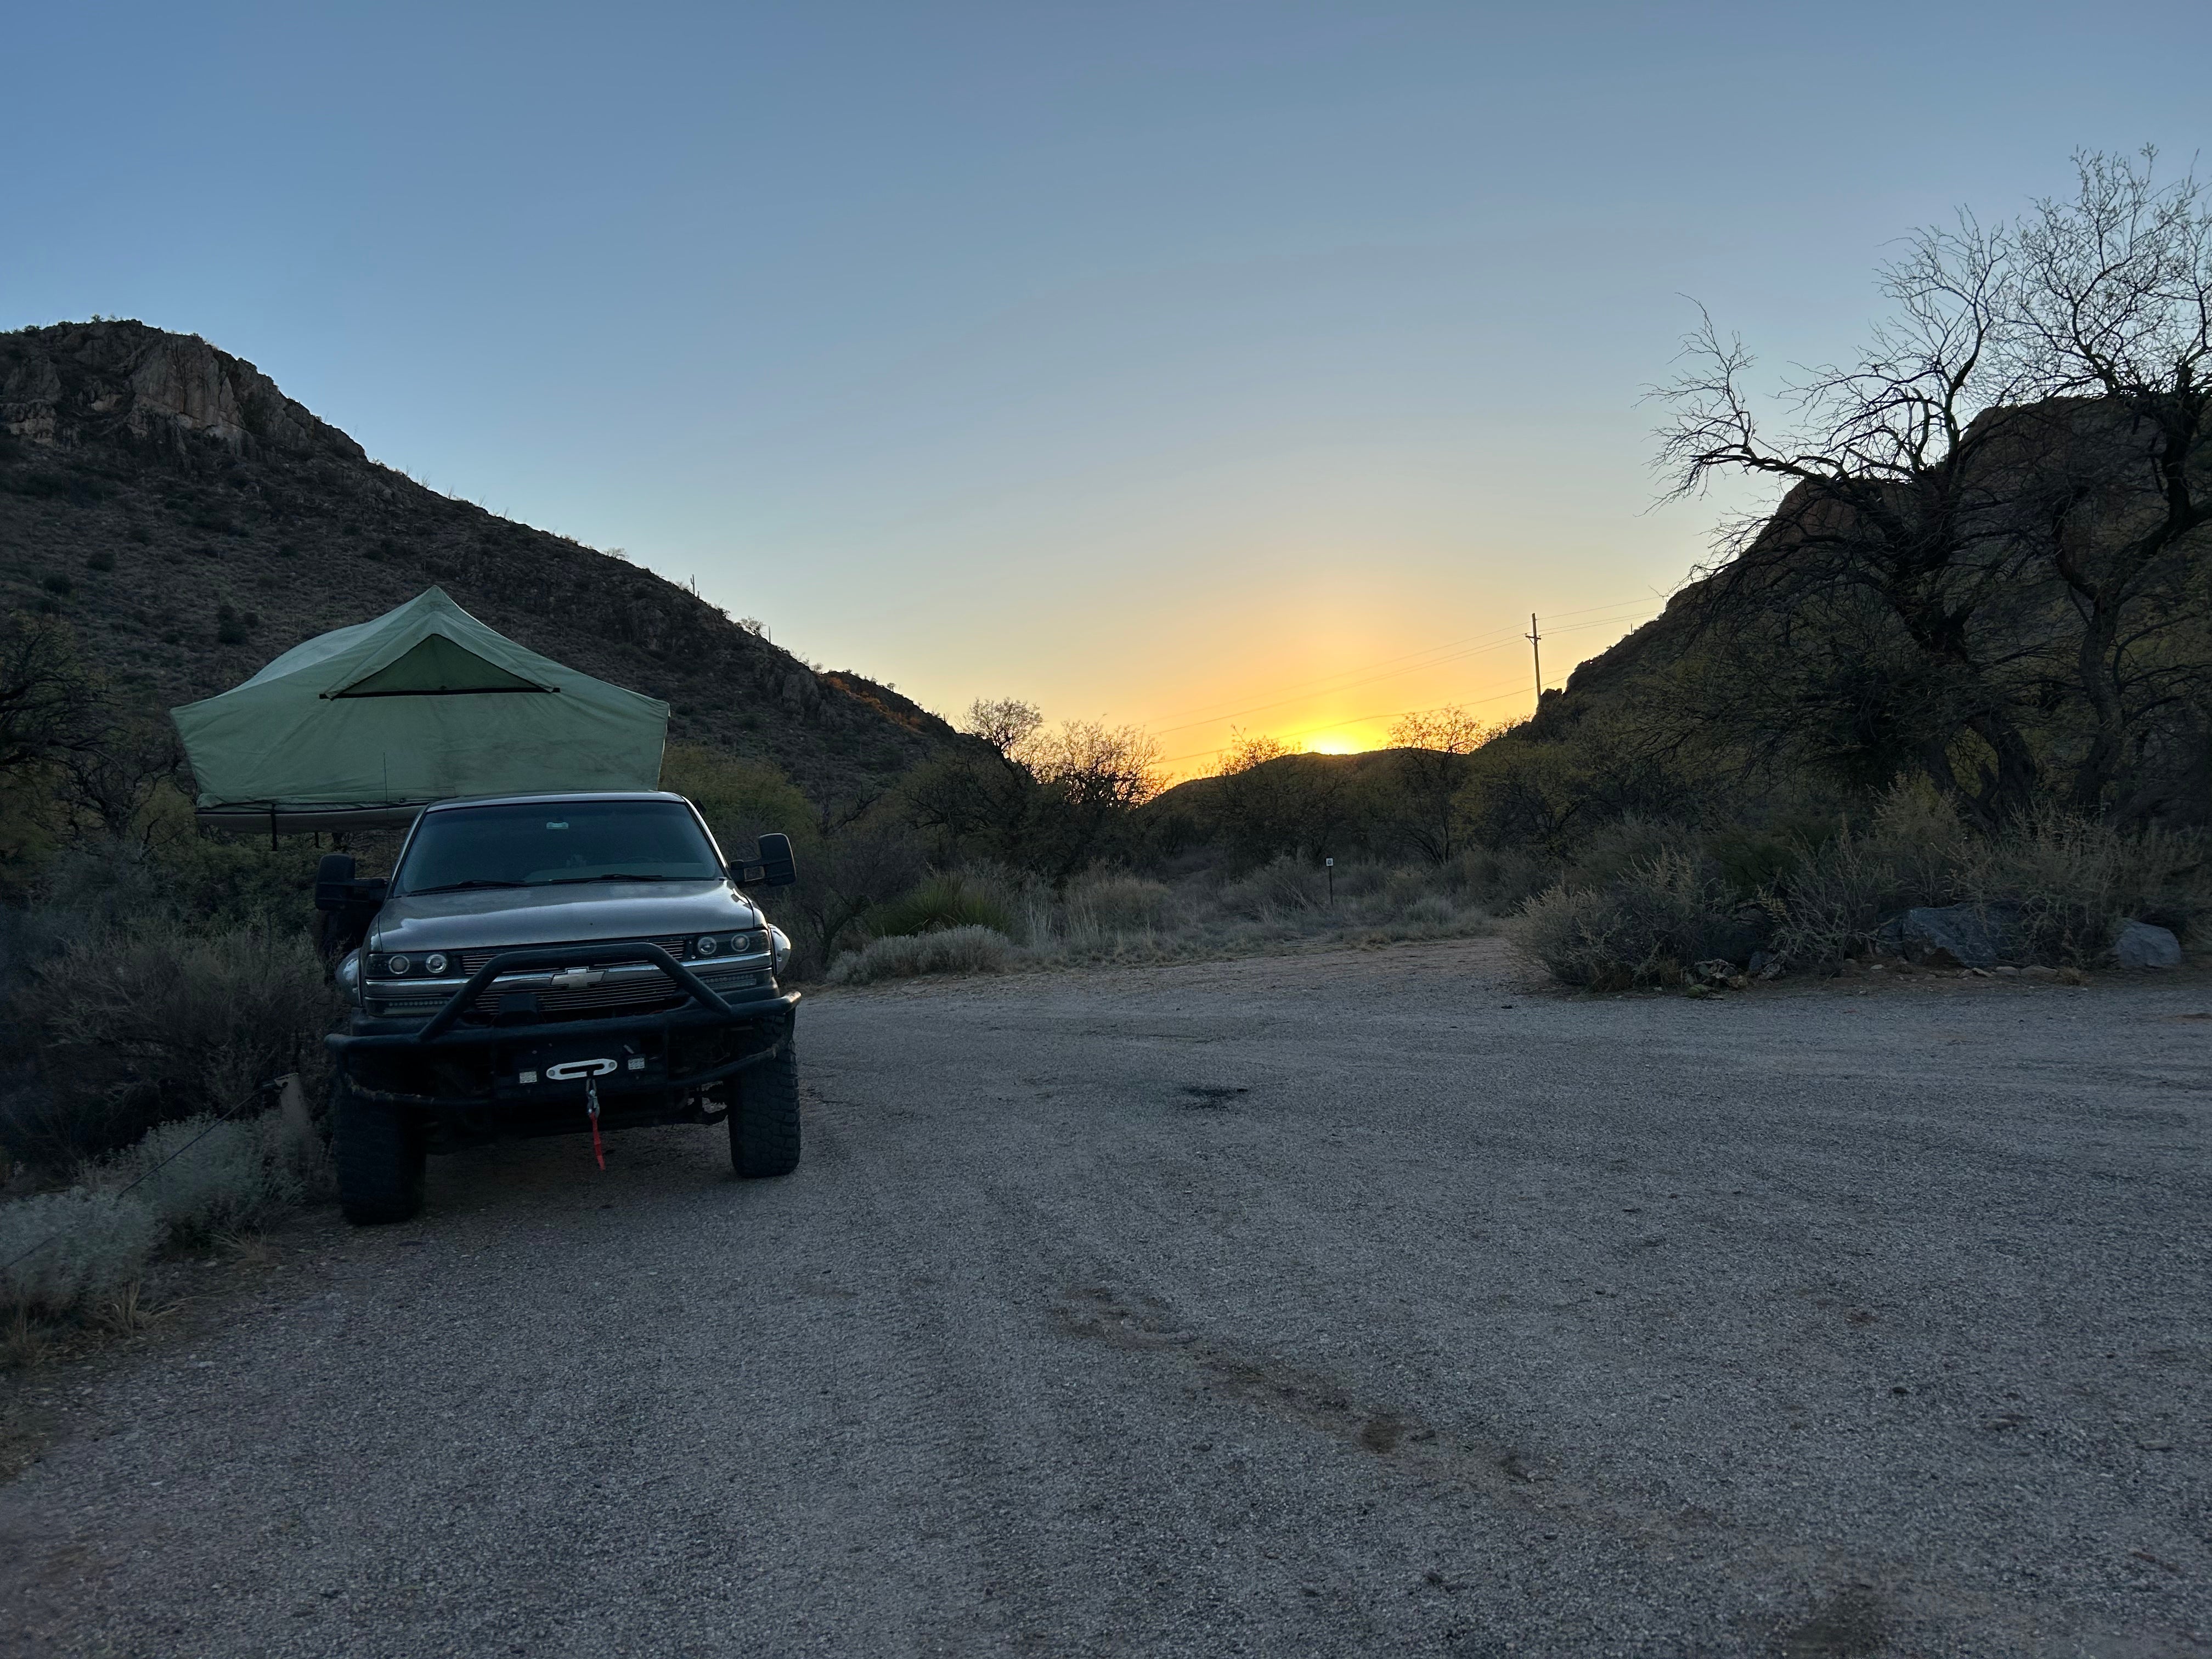 Camper submitted image from Colossal Cave Mountain Park - 5